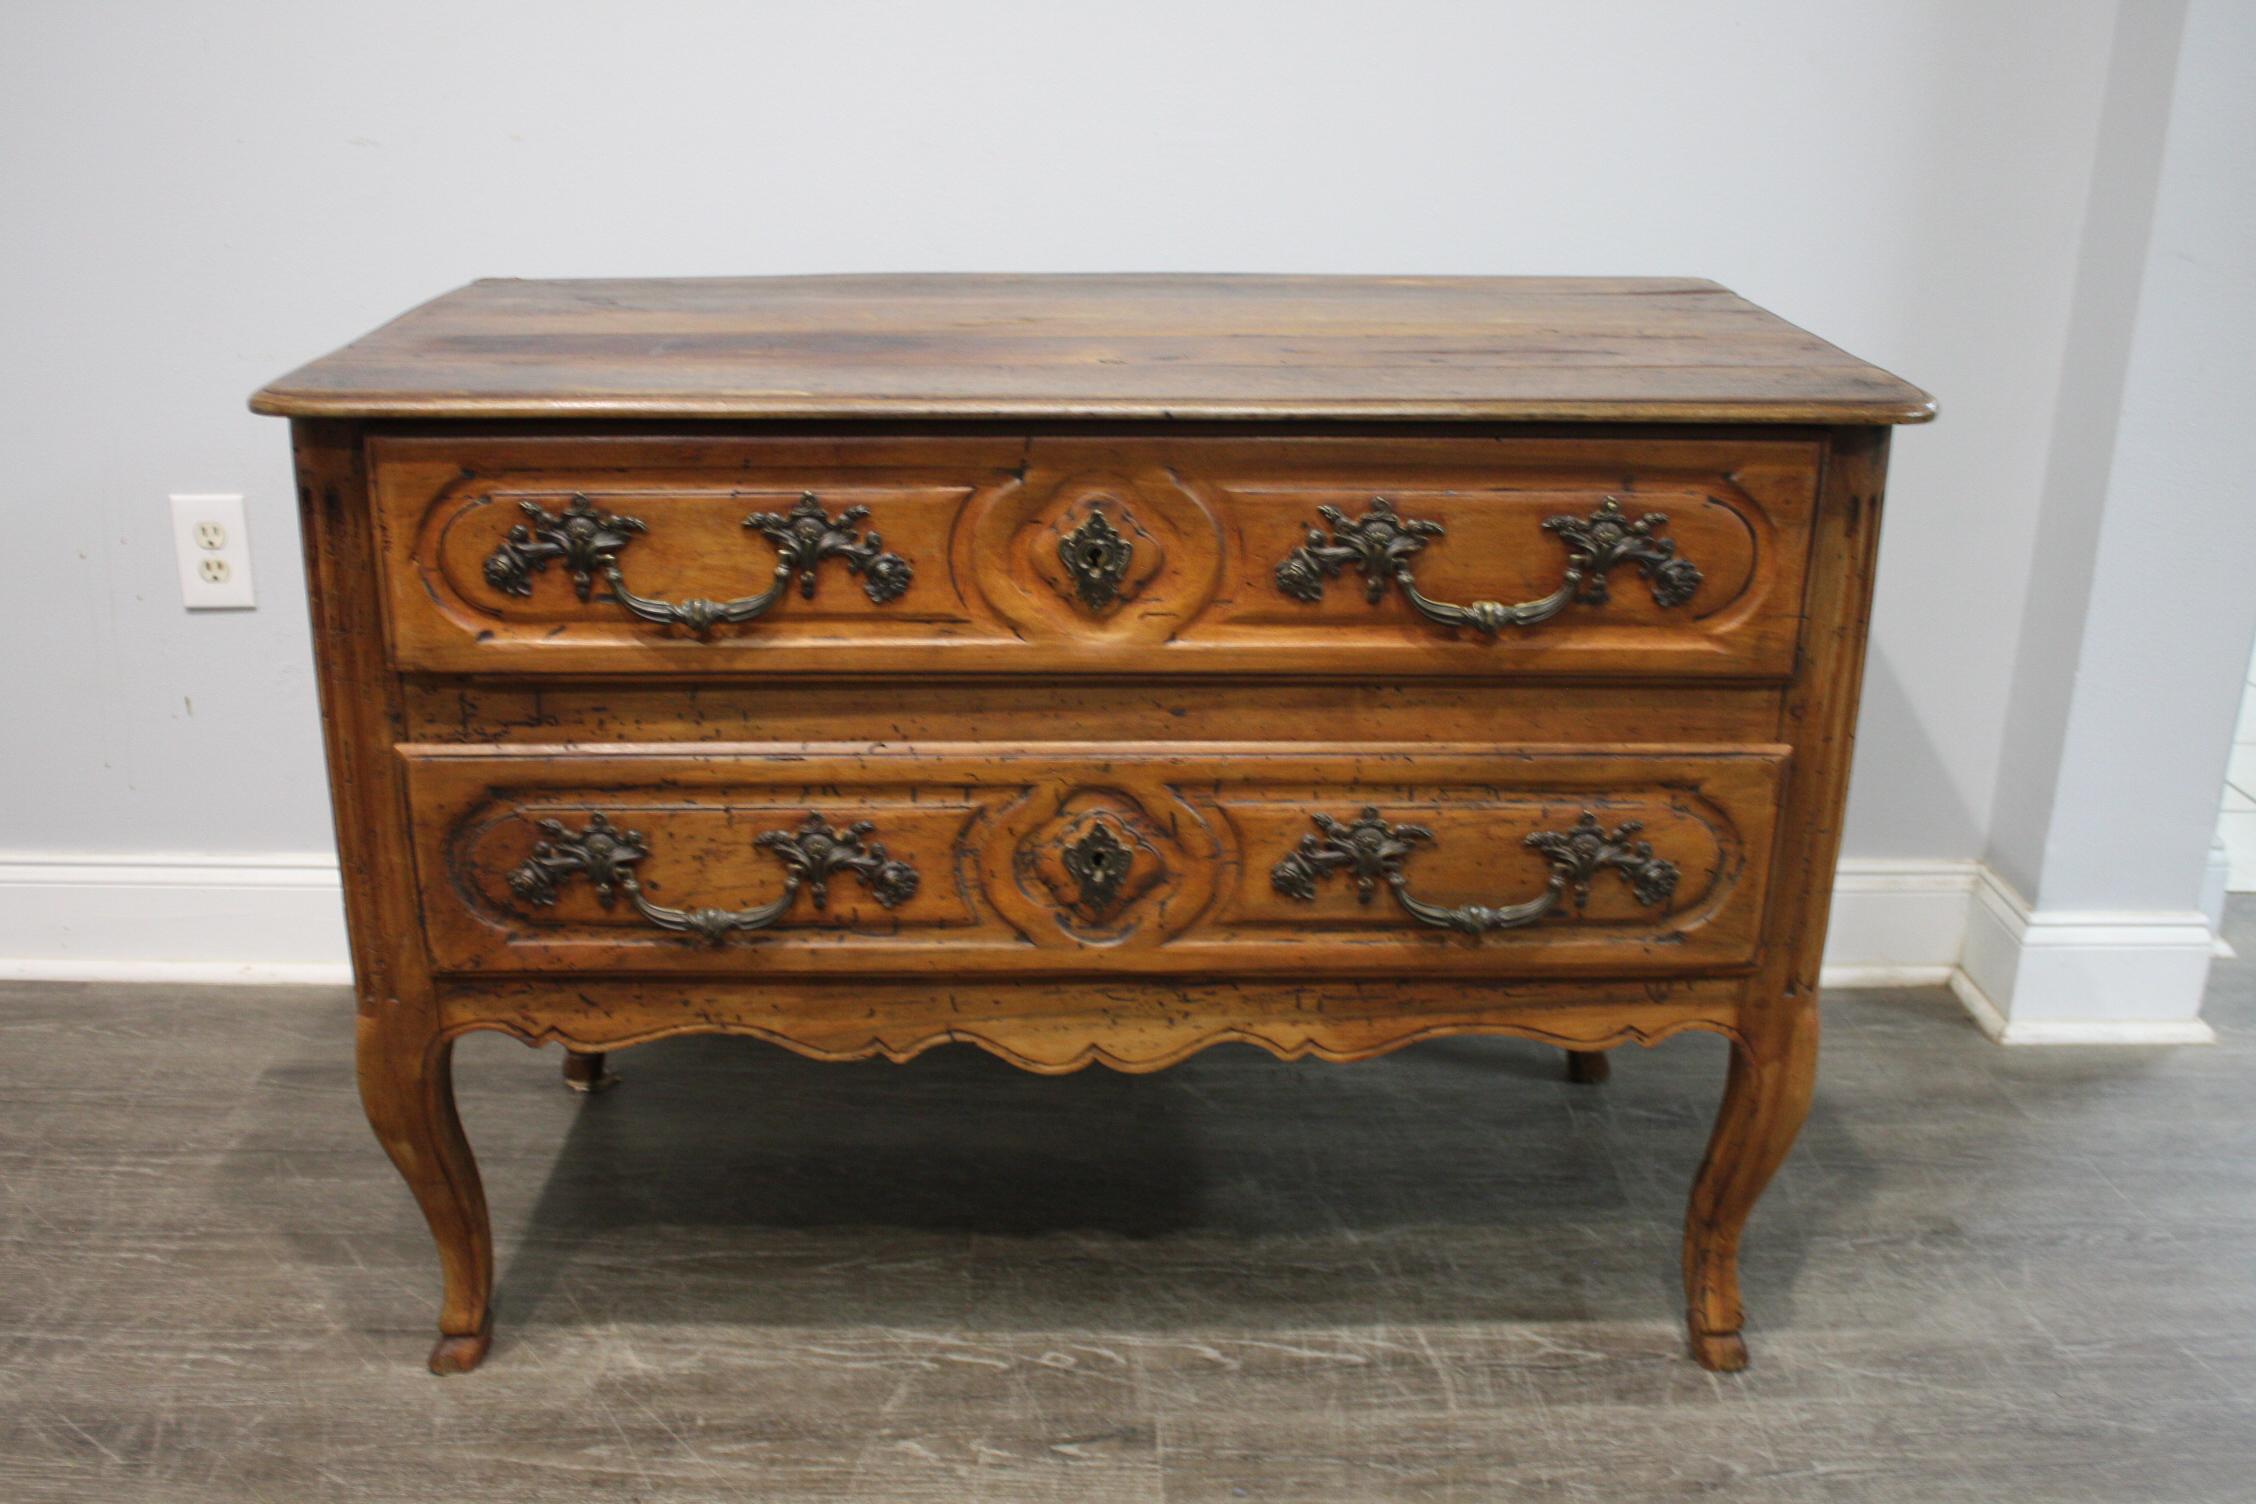 This commode is made of plain walnut with amazing hardware. The feet are finished with a form of deer feet.